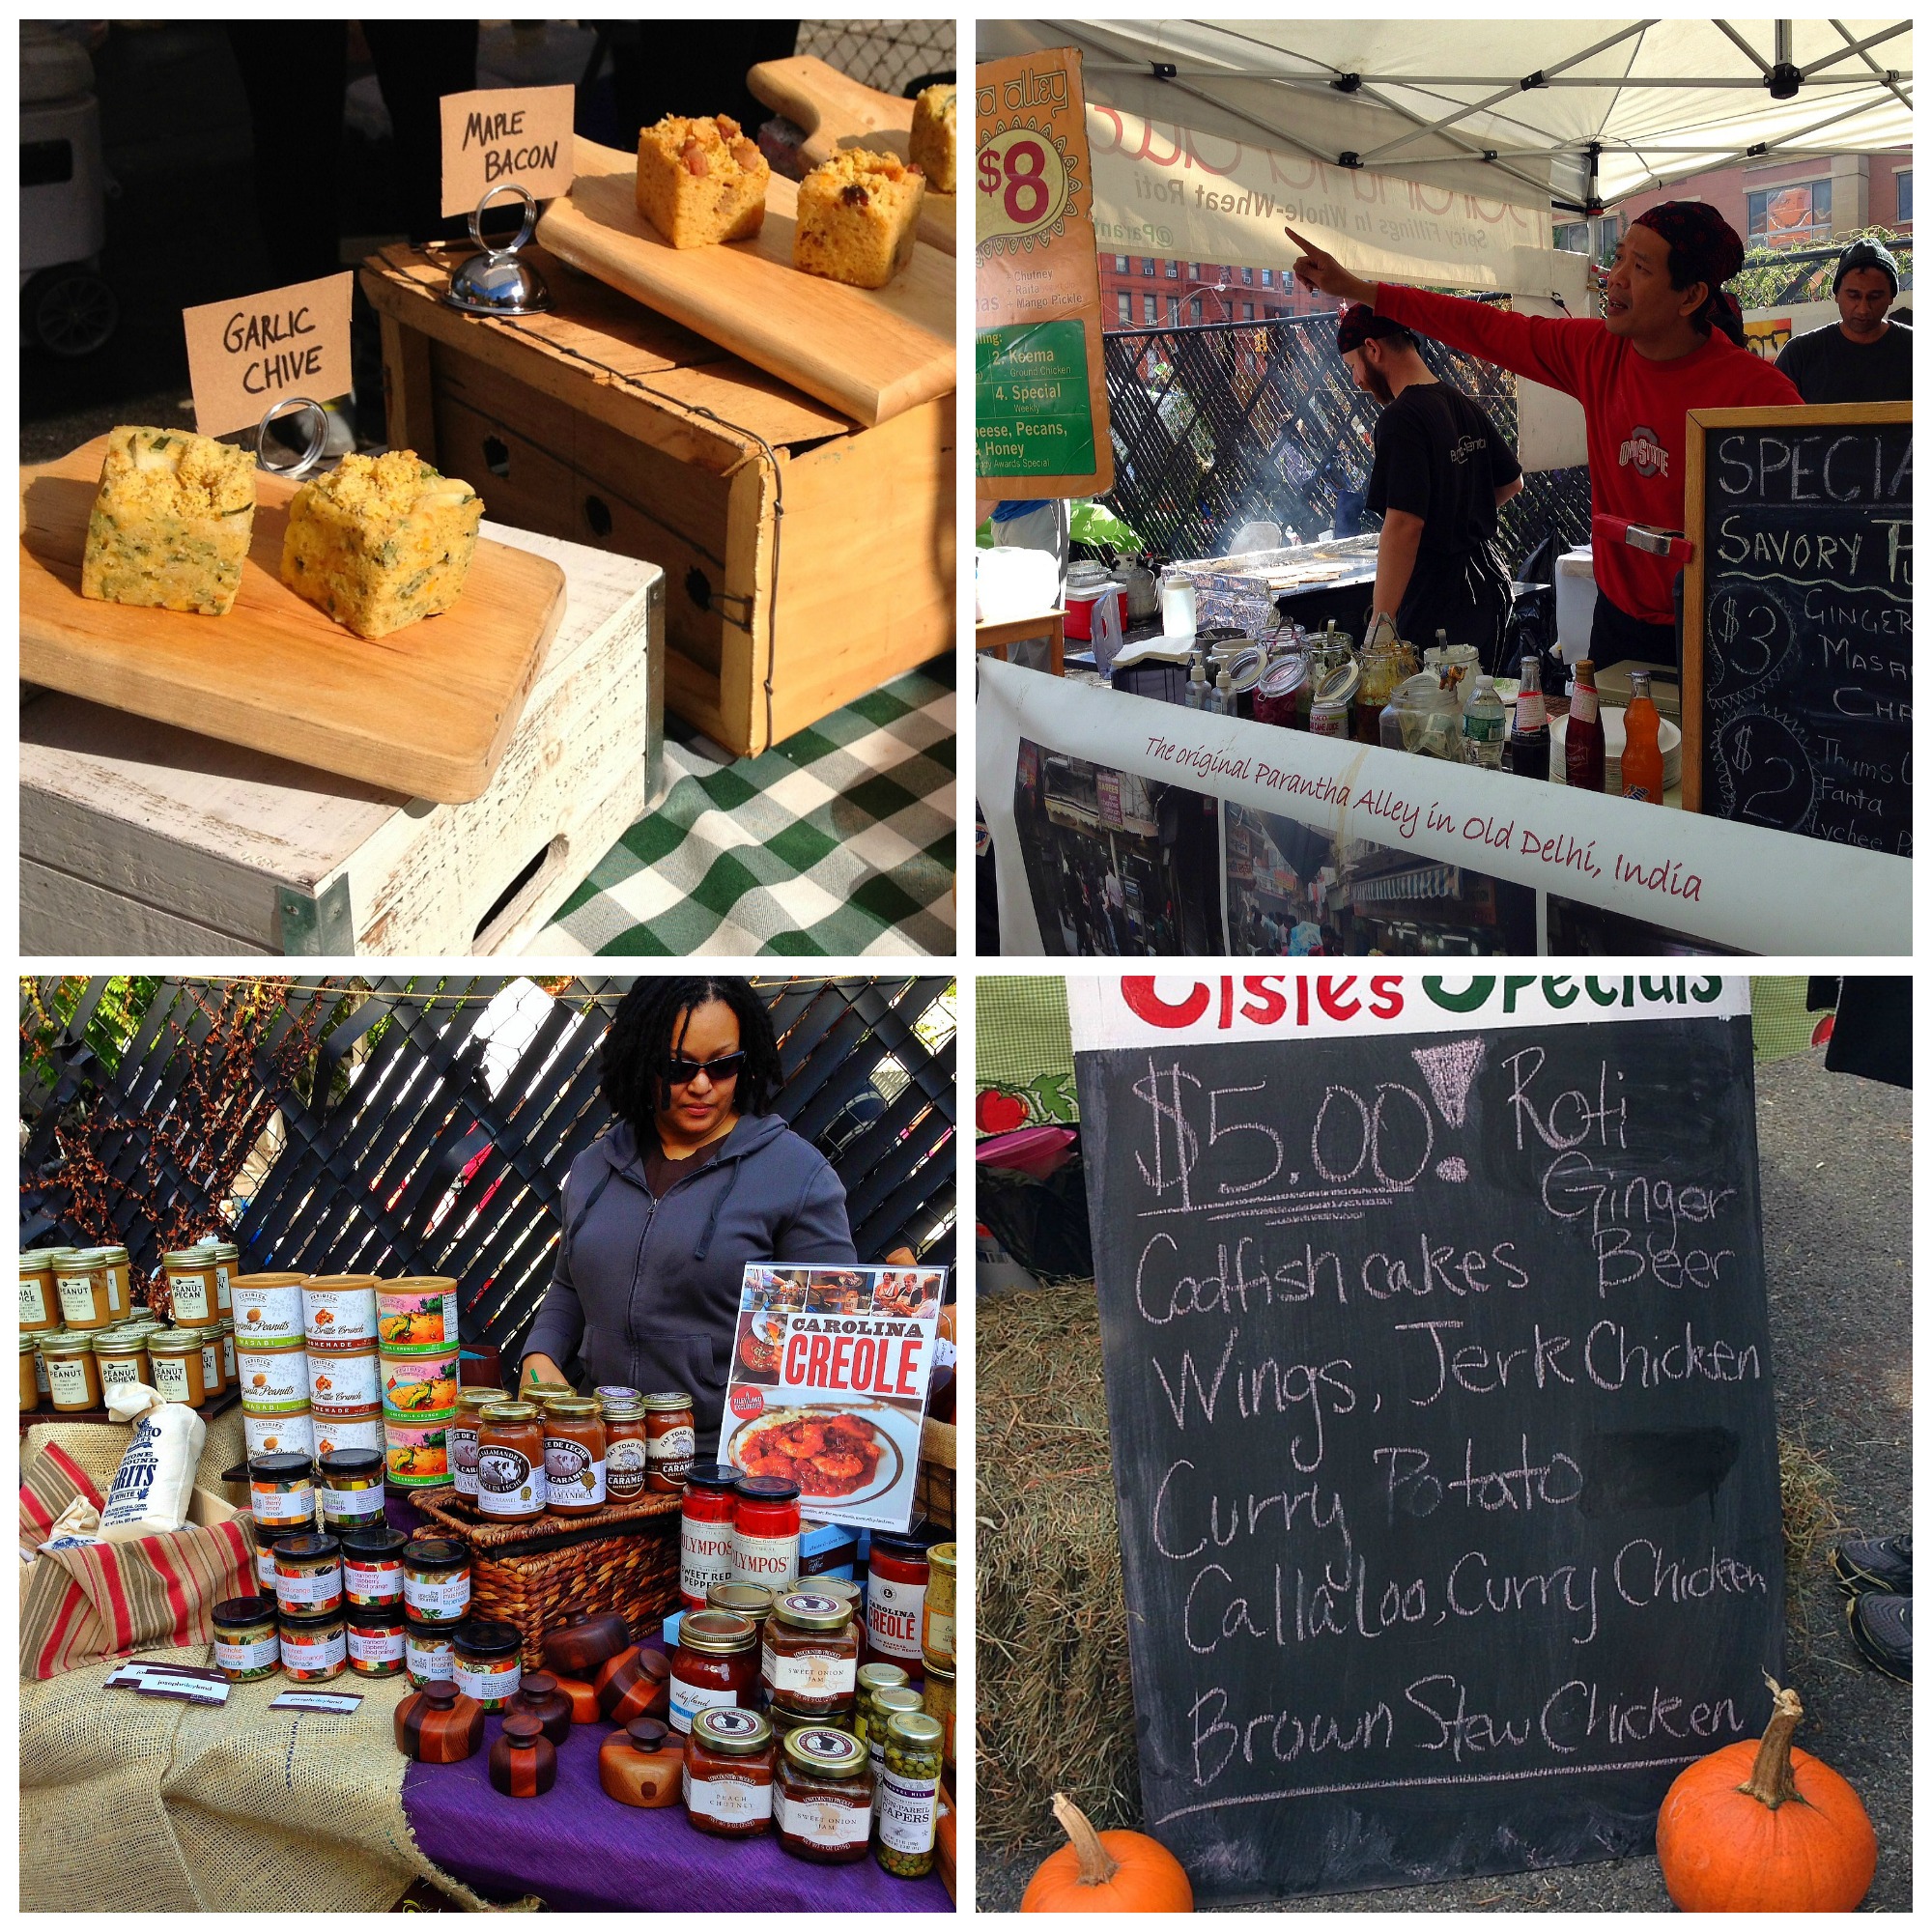 Vendors selling handmade food and innovative gourmet products at Harlem Food Festival 2013